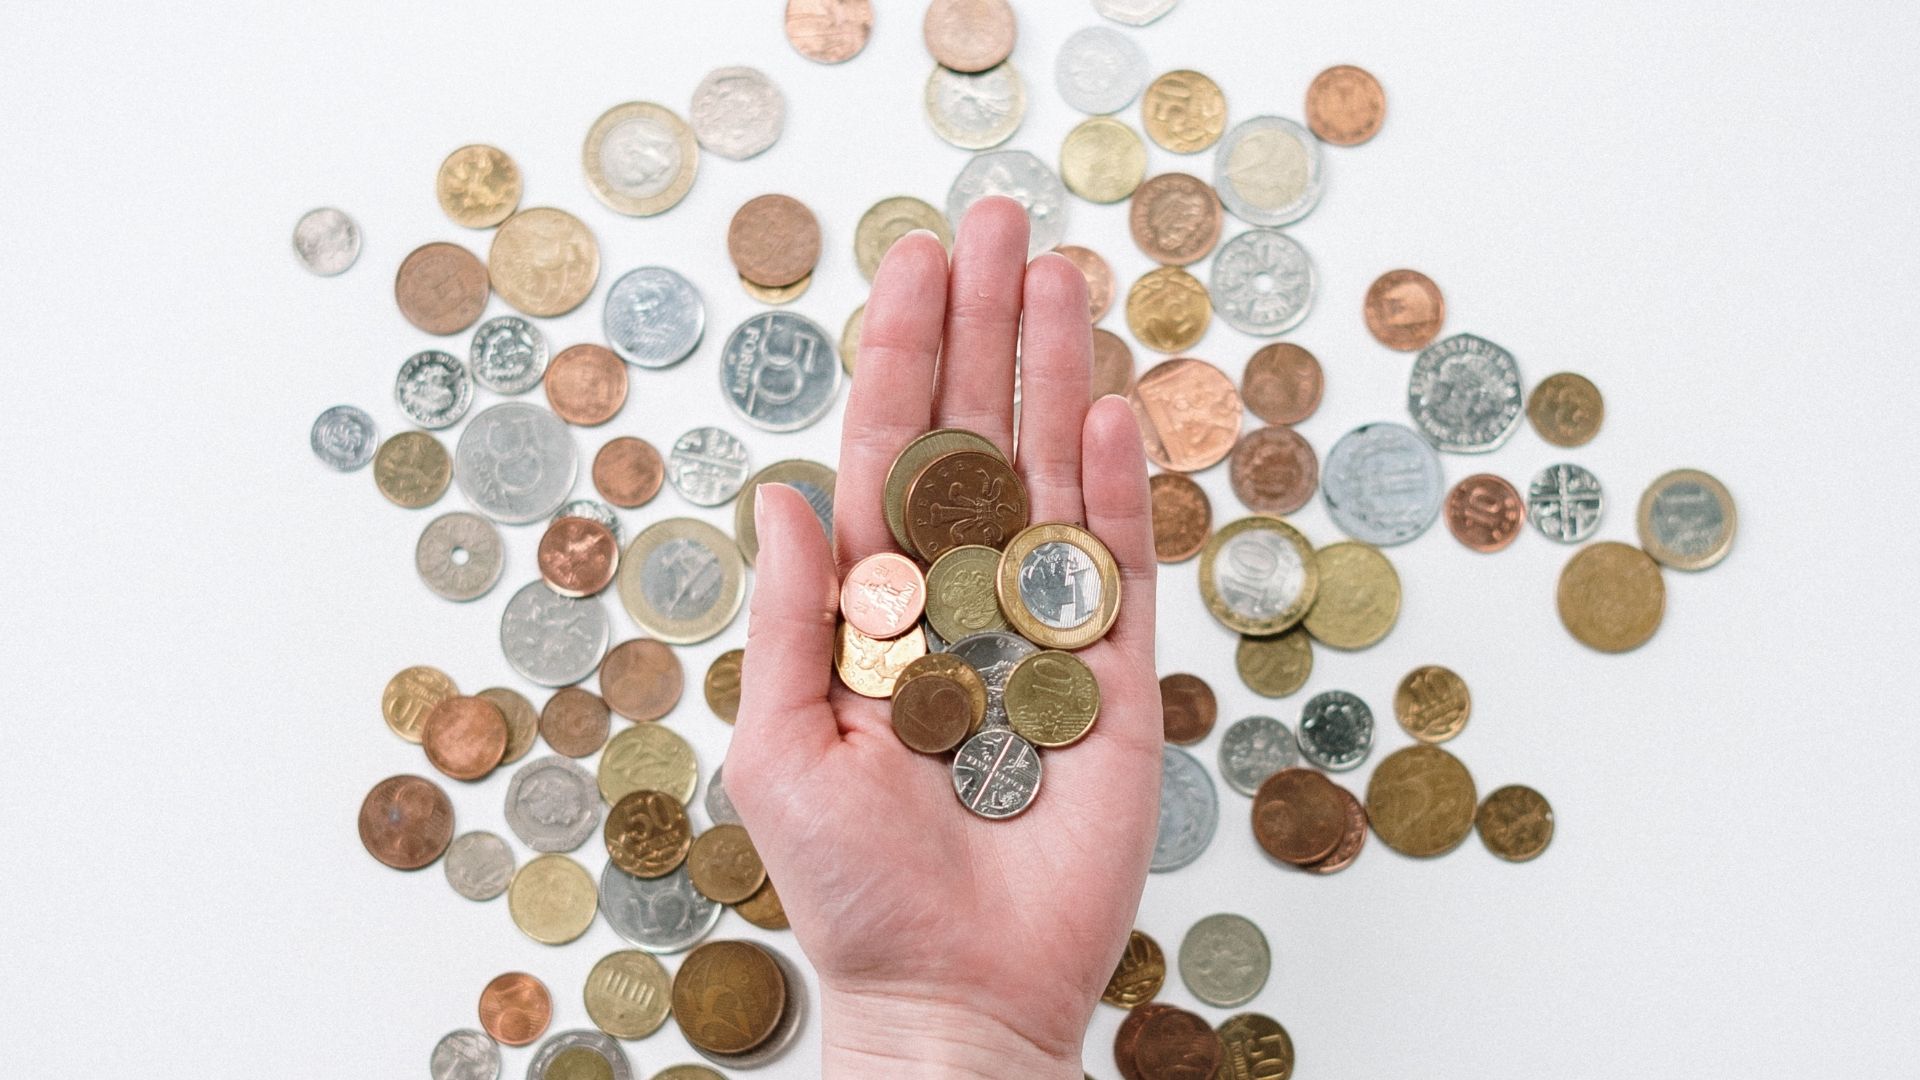 A hand surrounded by coins